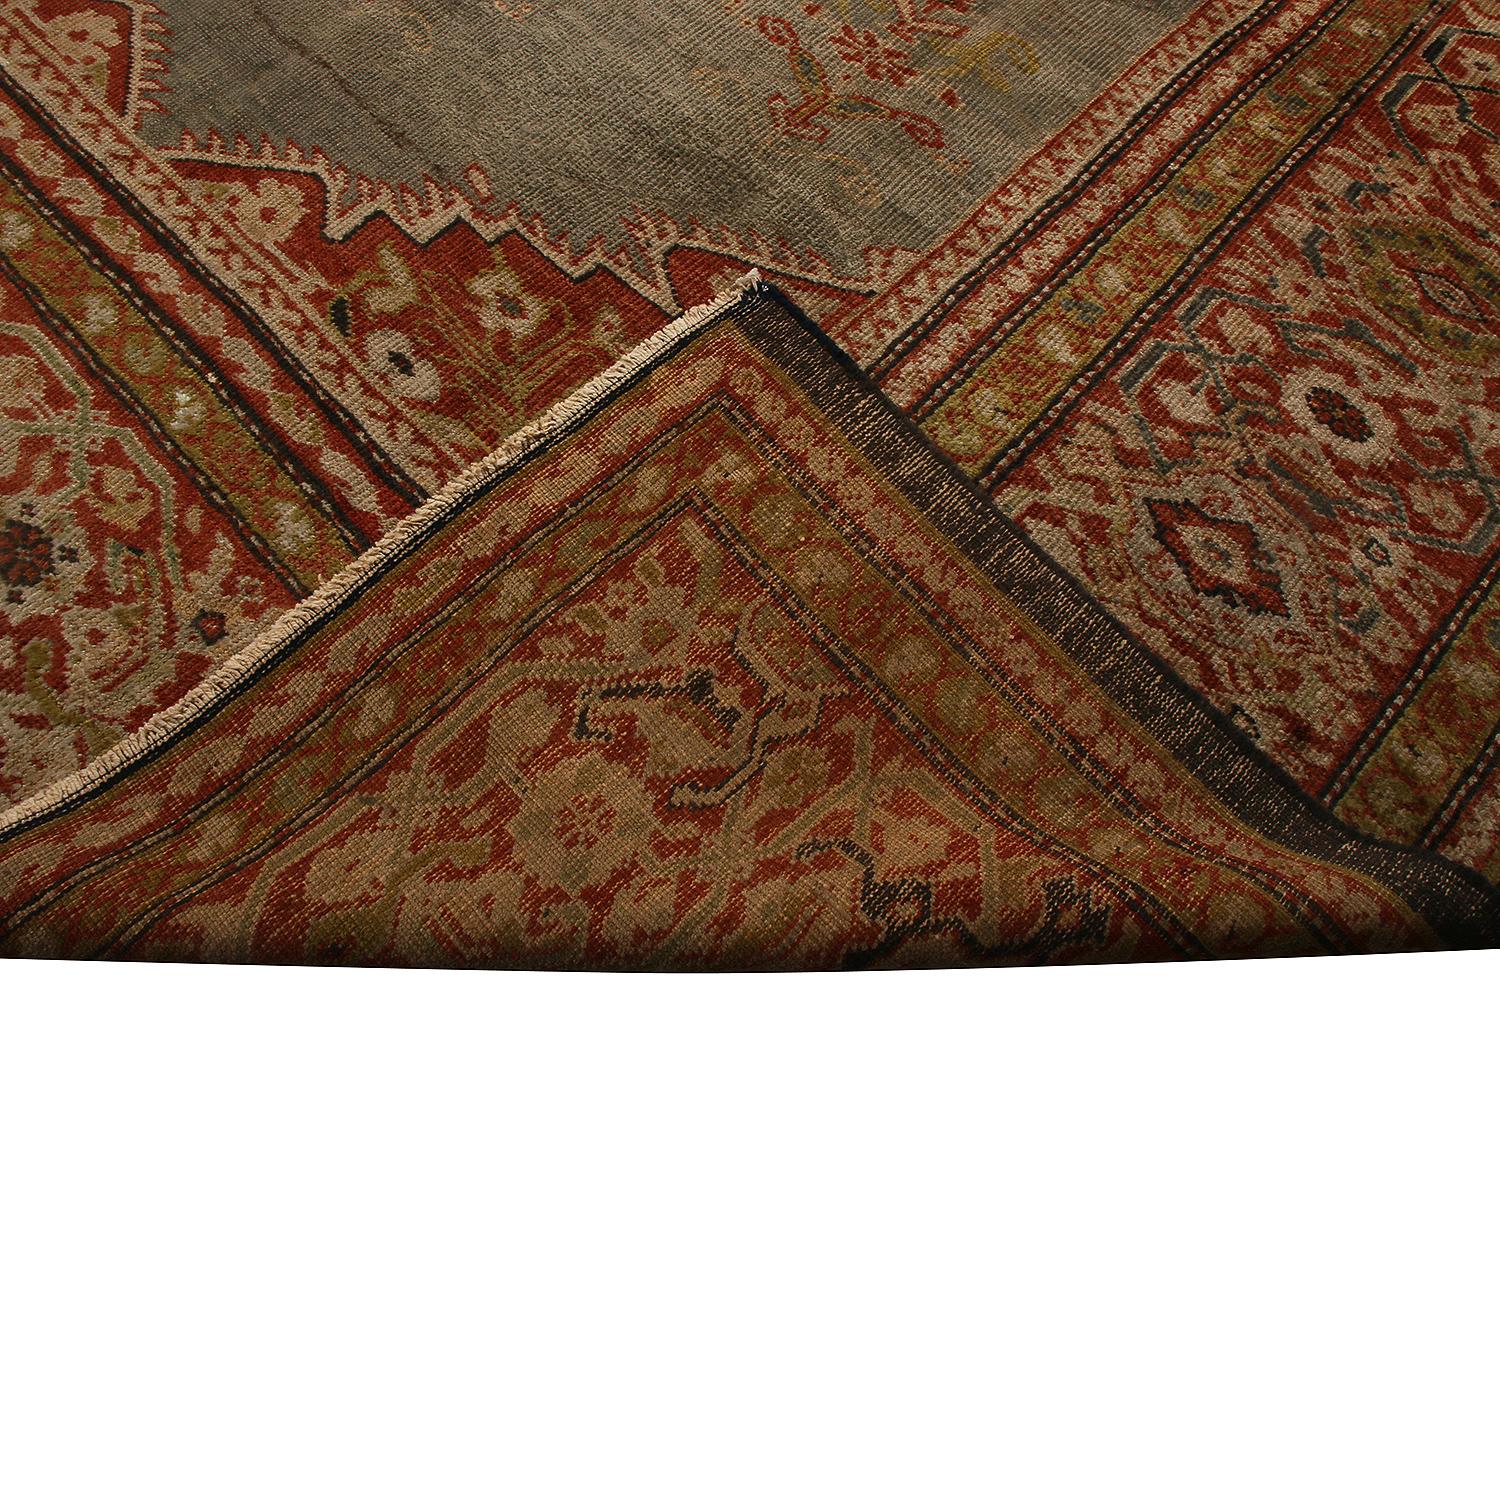 Antique Sultanabad Blue and Burgundy Wool Persian Rug with Gold-Brown Highlights 2